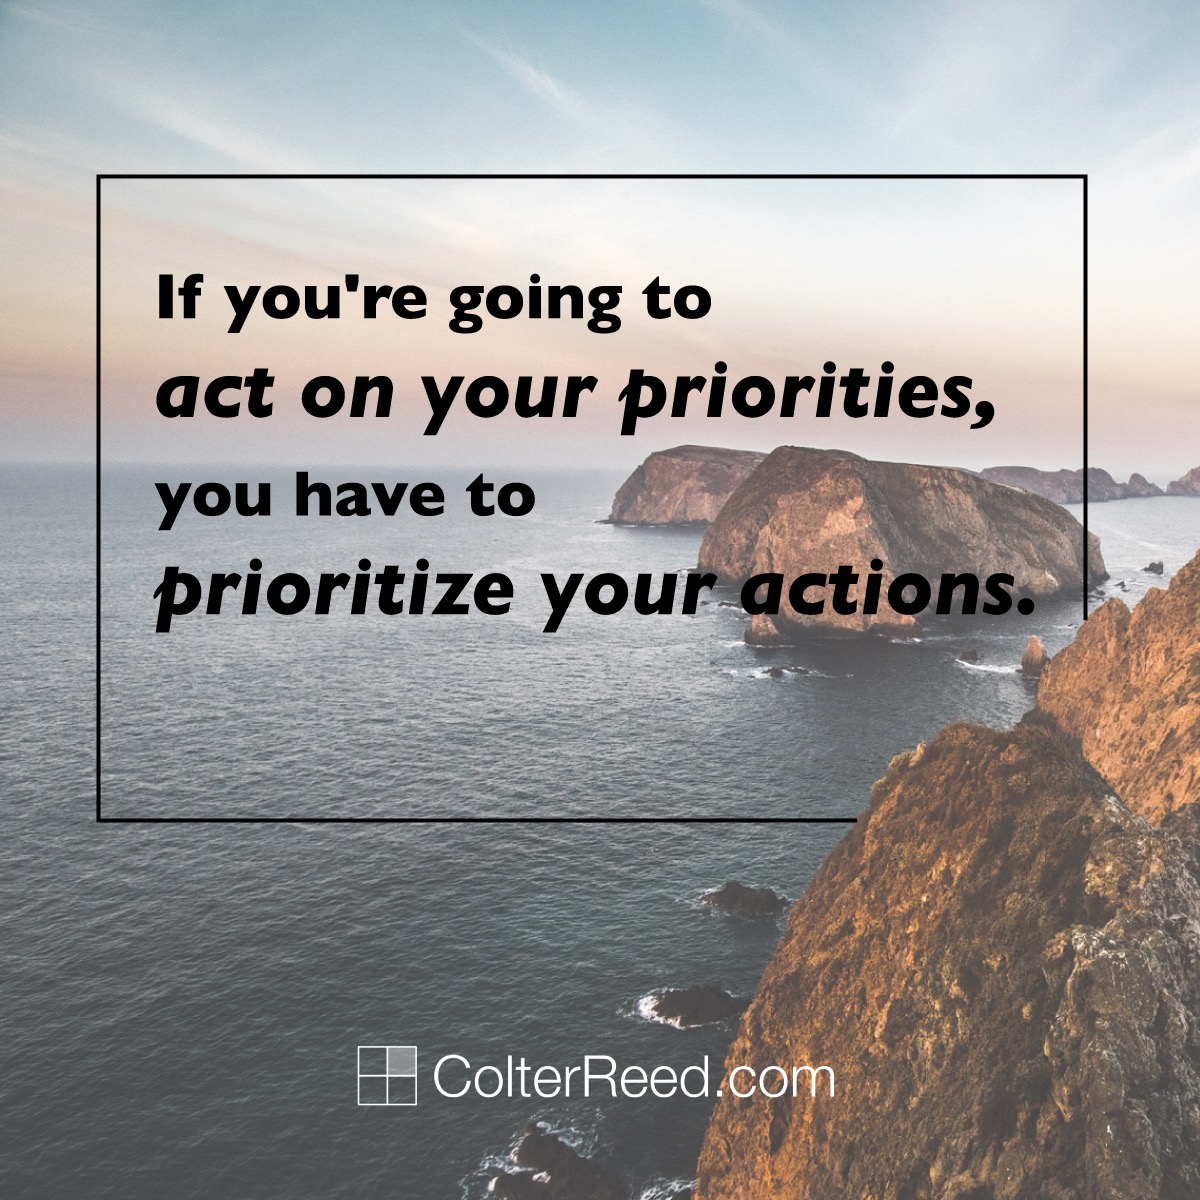 If you’re going to act on your priorities, you have to prioritize your actions.